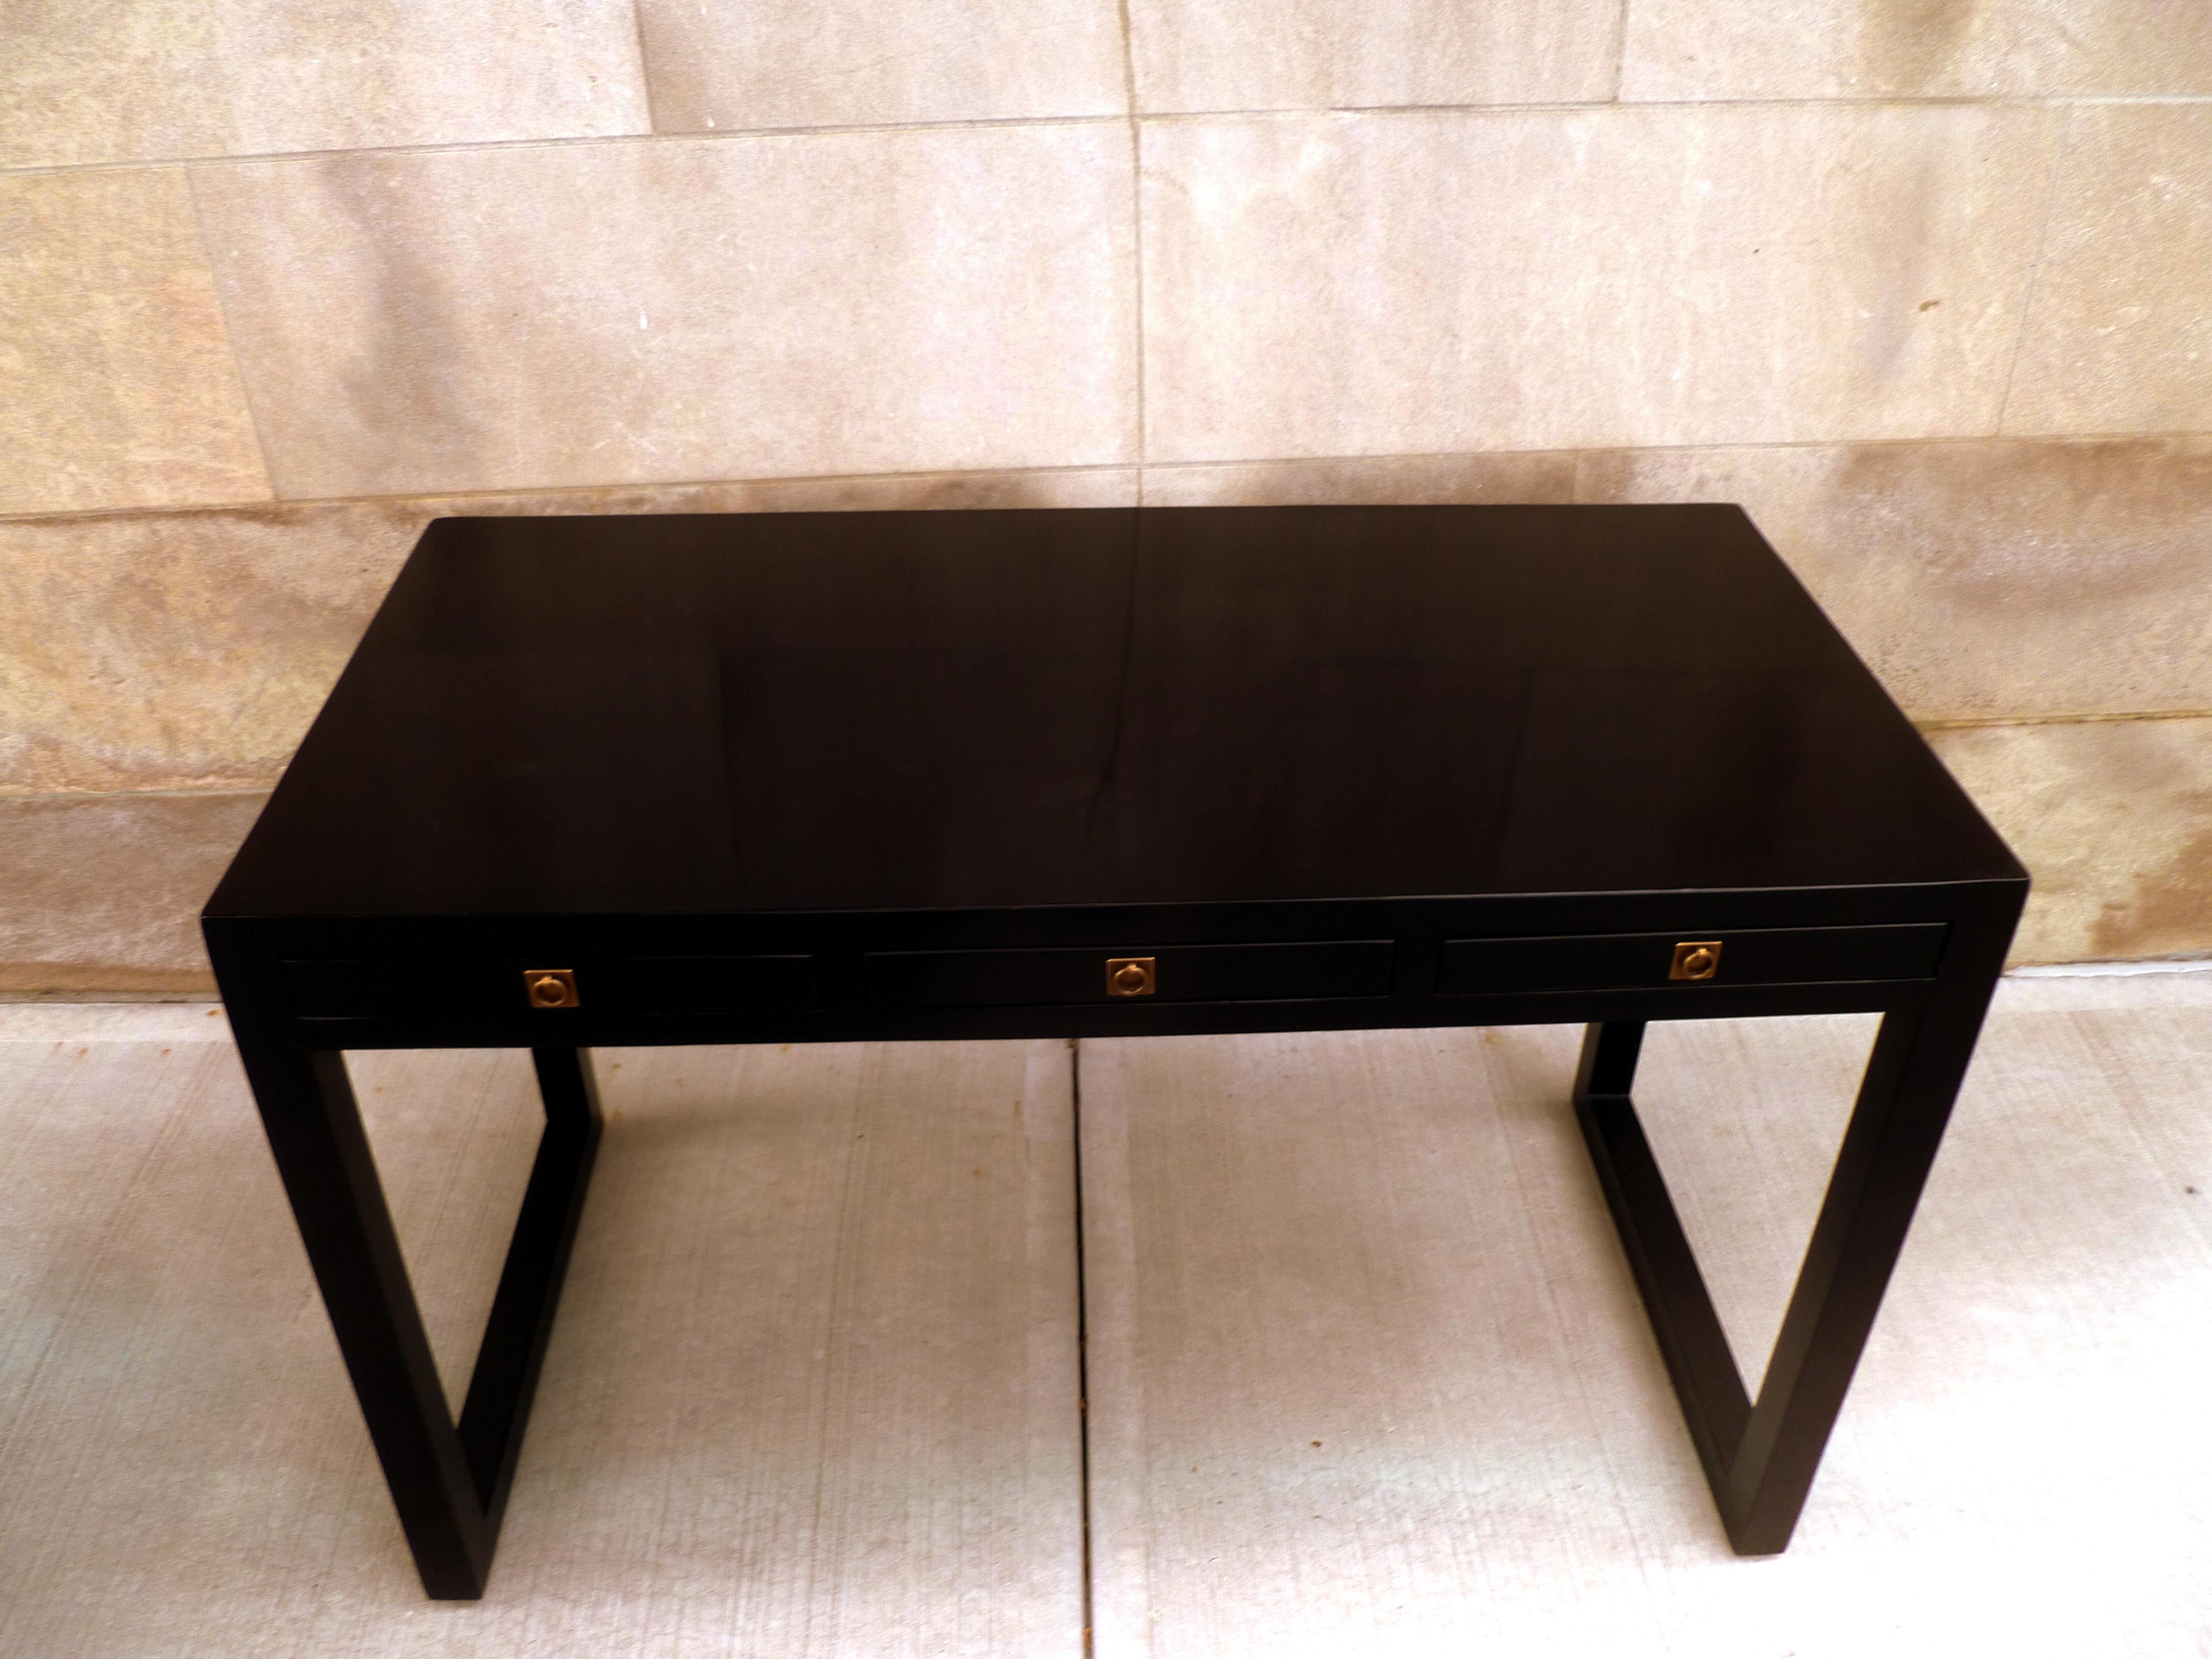 20th Century Black Lacquer Desk with Drawers